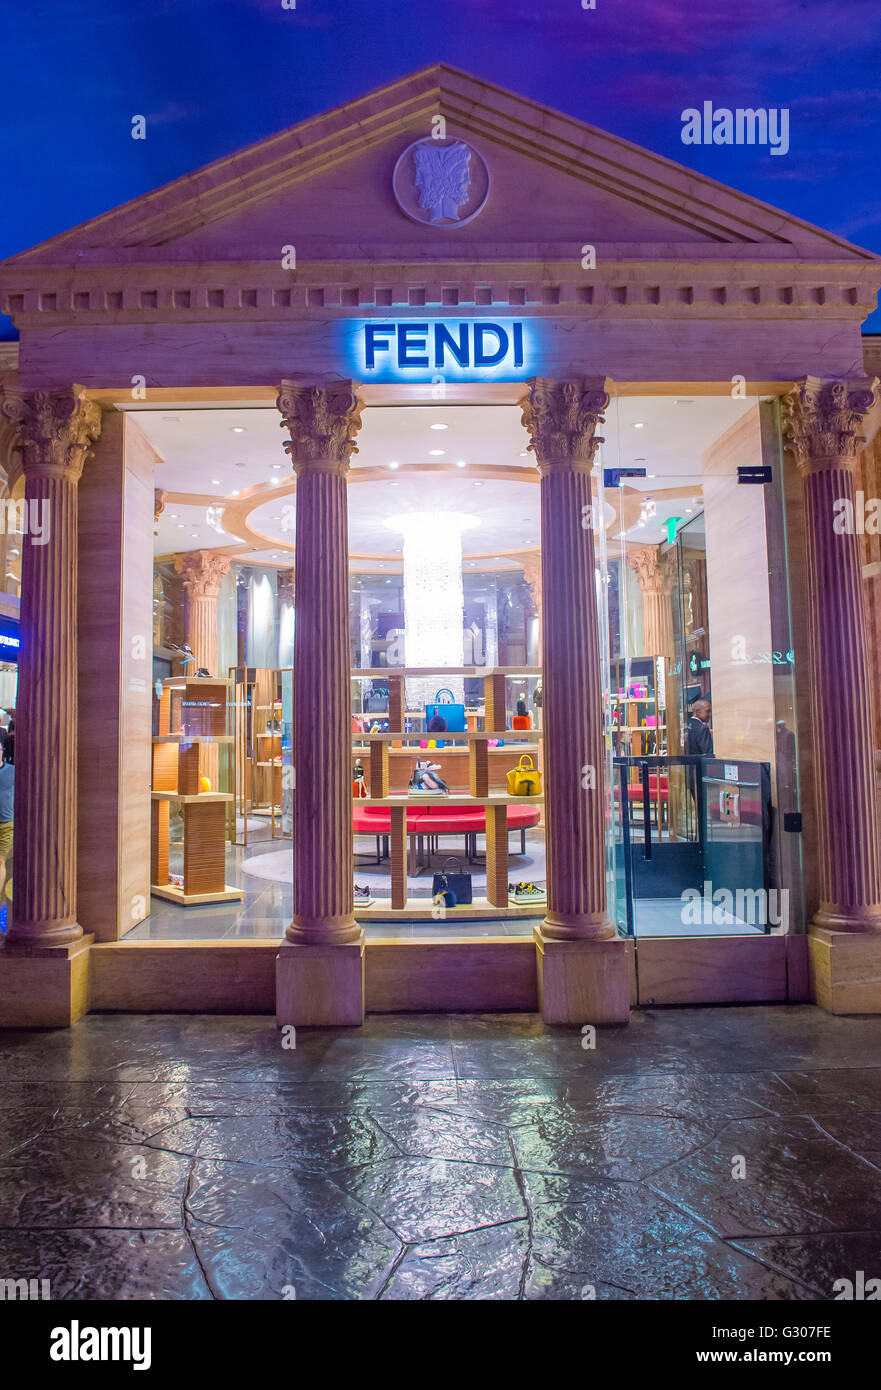 LAS VEGAS - APRIL 13 : Exterior Of A Fendi Store In Caesars Palace Hotel In  Las Vegas On April 13 , 2016. Fendi Is A Multinational Luxury Goods Brand  Owned By